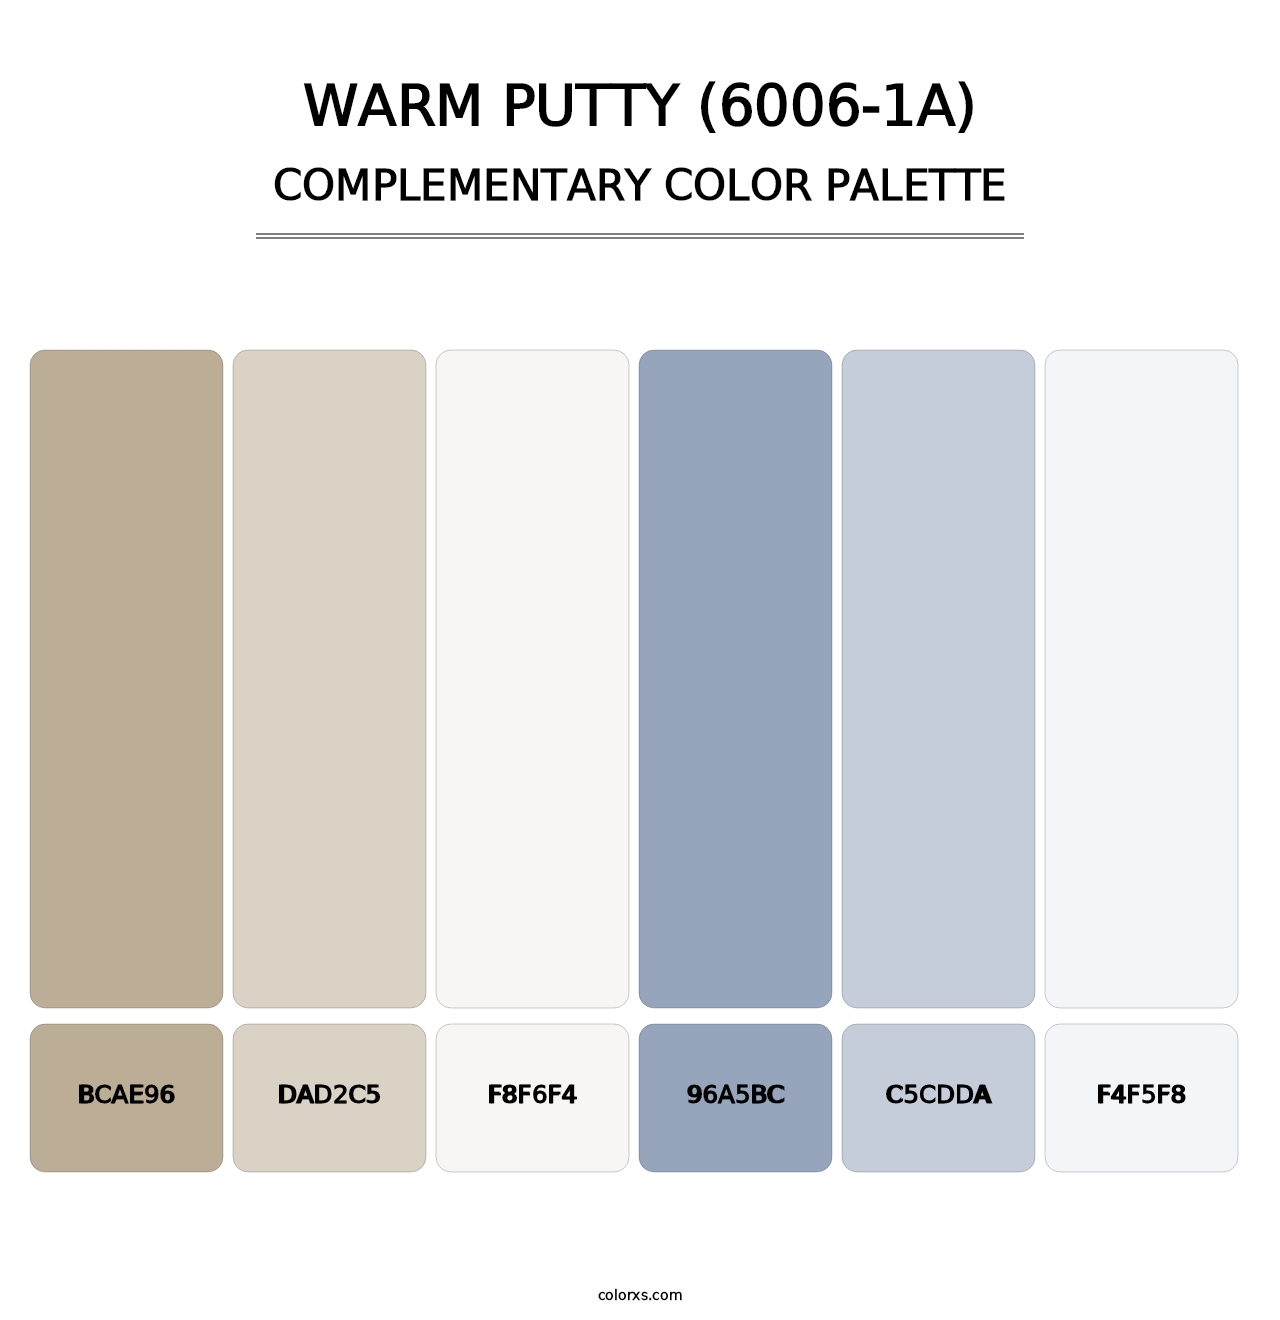 Warm Putty (6006-1A) - Complementary Color Palette